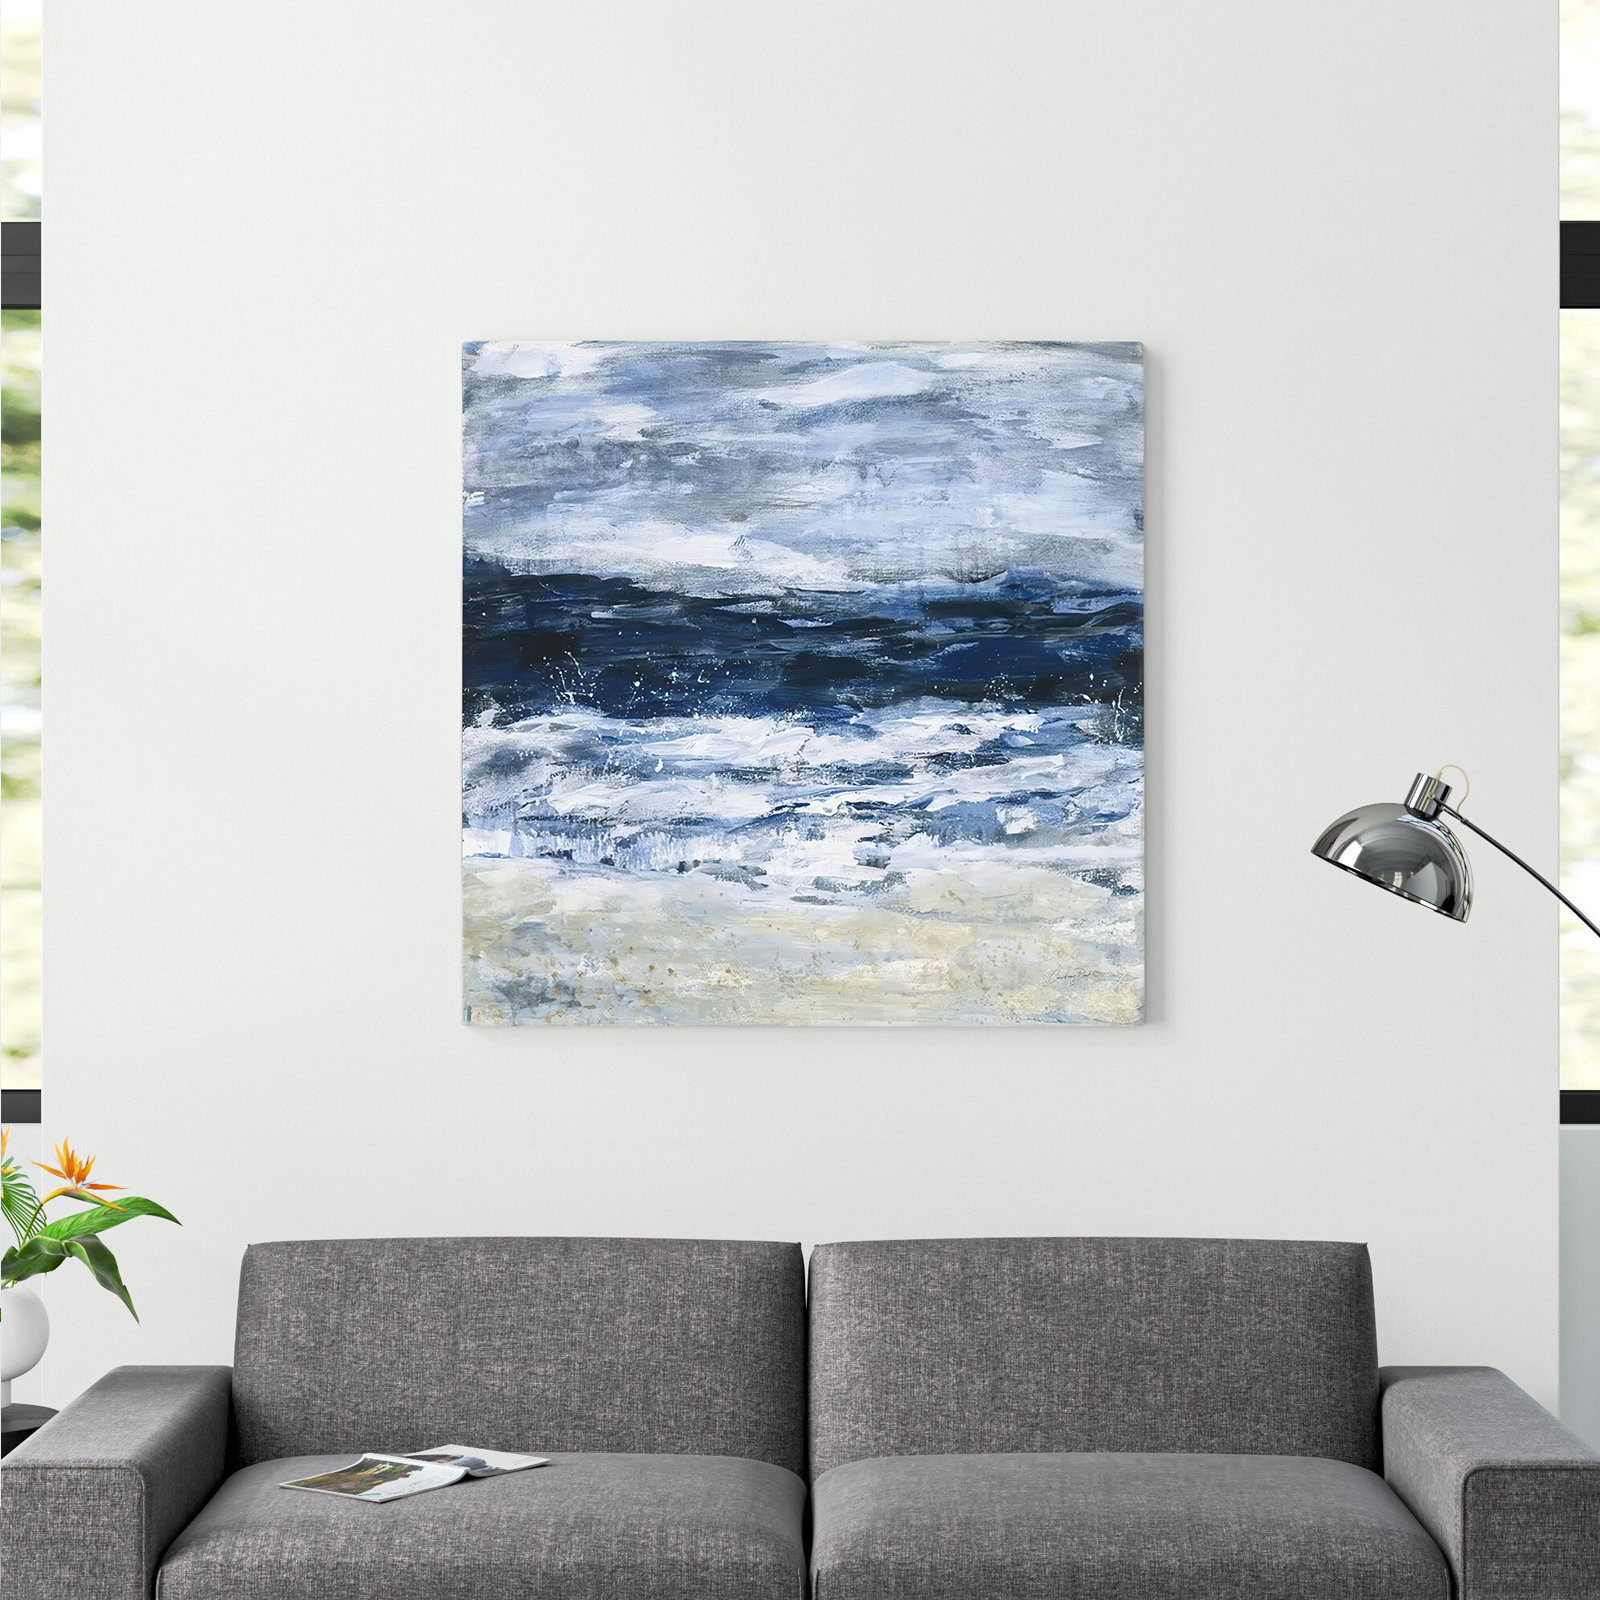 Beachcrest Home Seaside Escape II Framed On Canvas by Courtney Prahl  Painting & Reviews